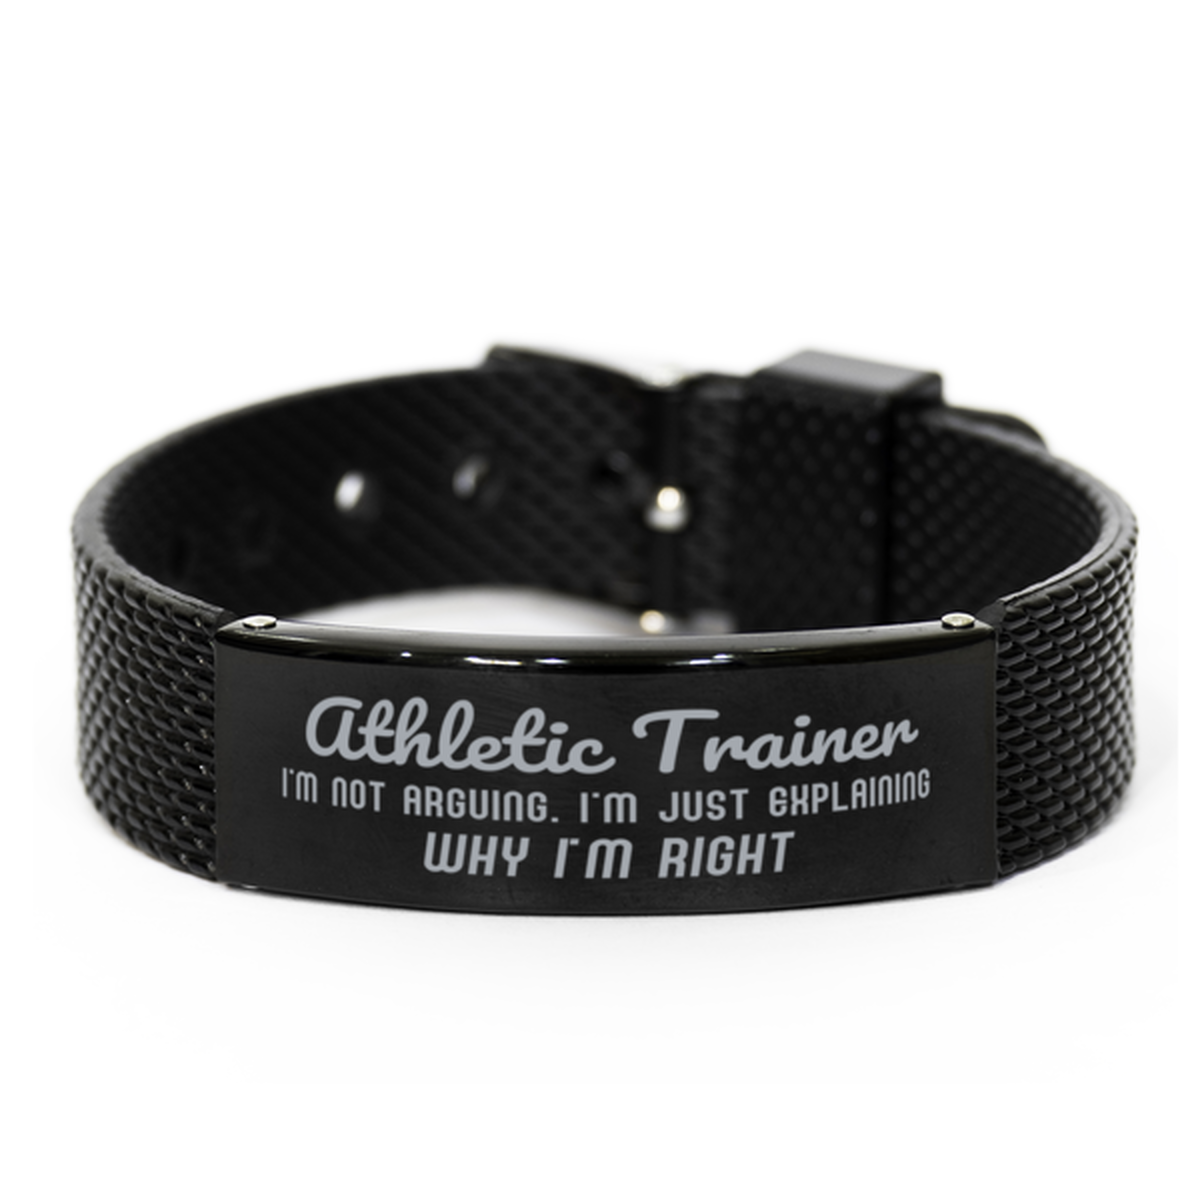 Athletic Trainer I'm not Arguing. I'm Just Explaining Why I'm RIGHT Black Shark Mesh Bracelet, Funny Saying Quote Athletic Trainer Gifts For Athletic Trainer Graduation Birthday Christmas Gifts for Men Women Coworker